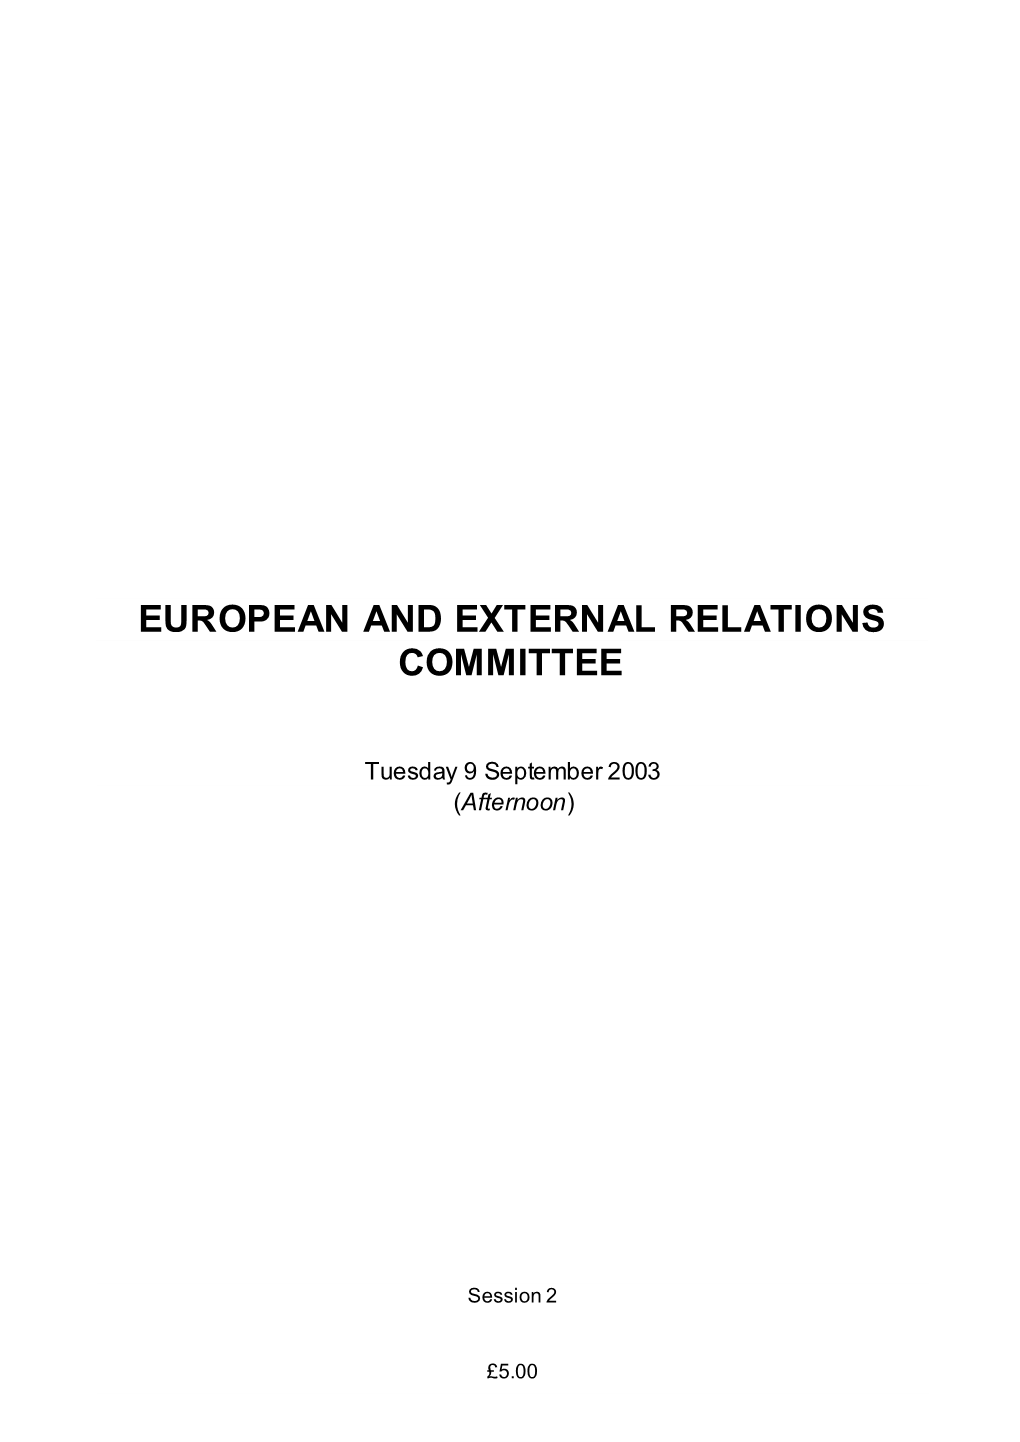 European and External Relations Committee